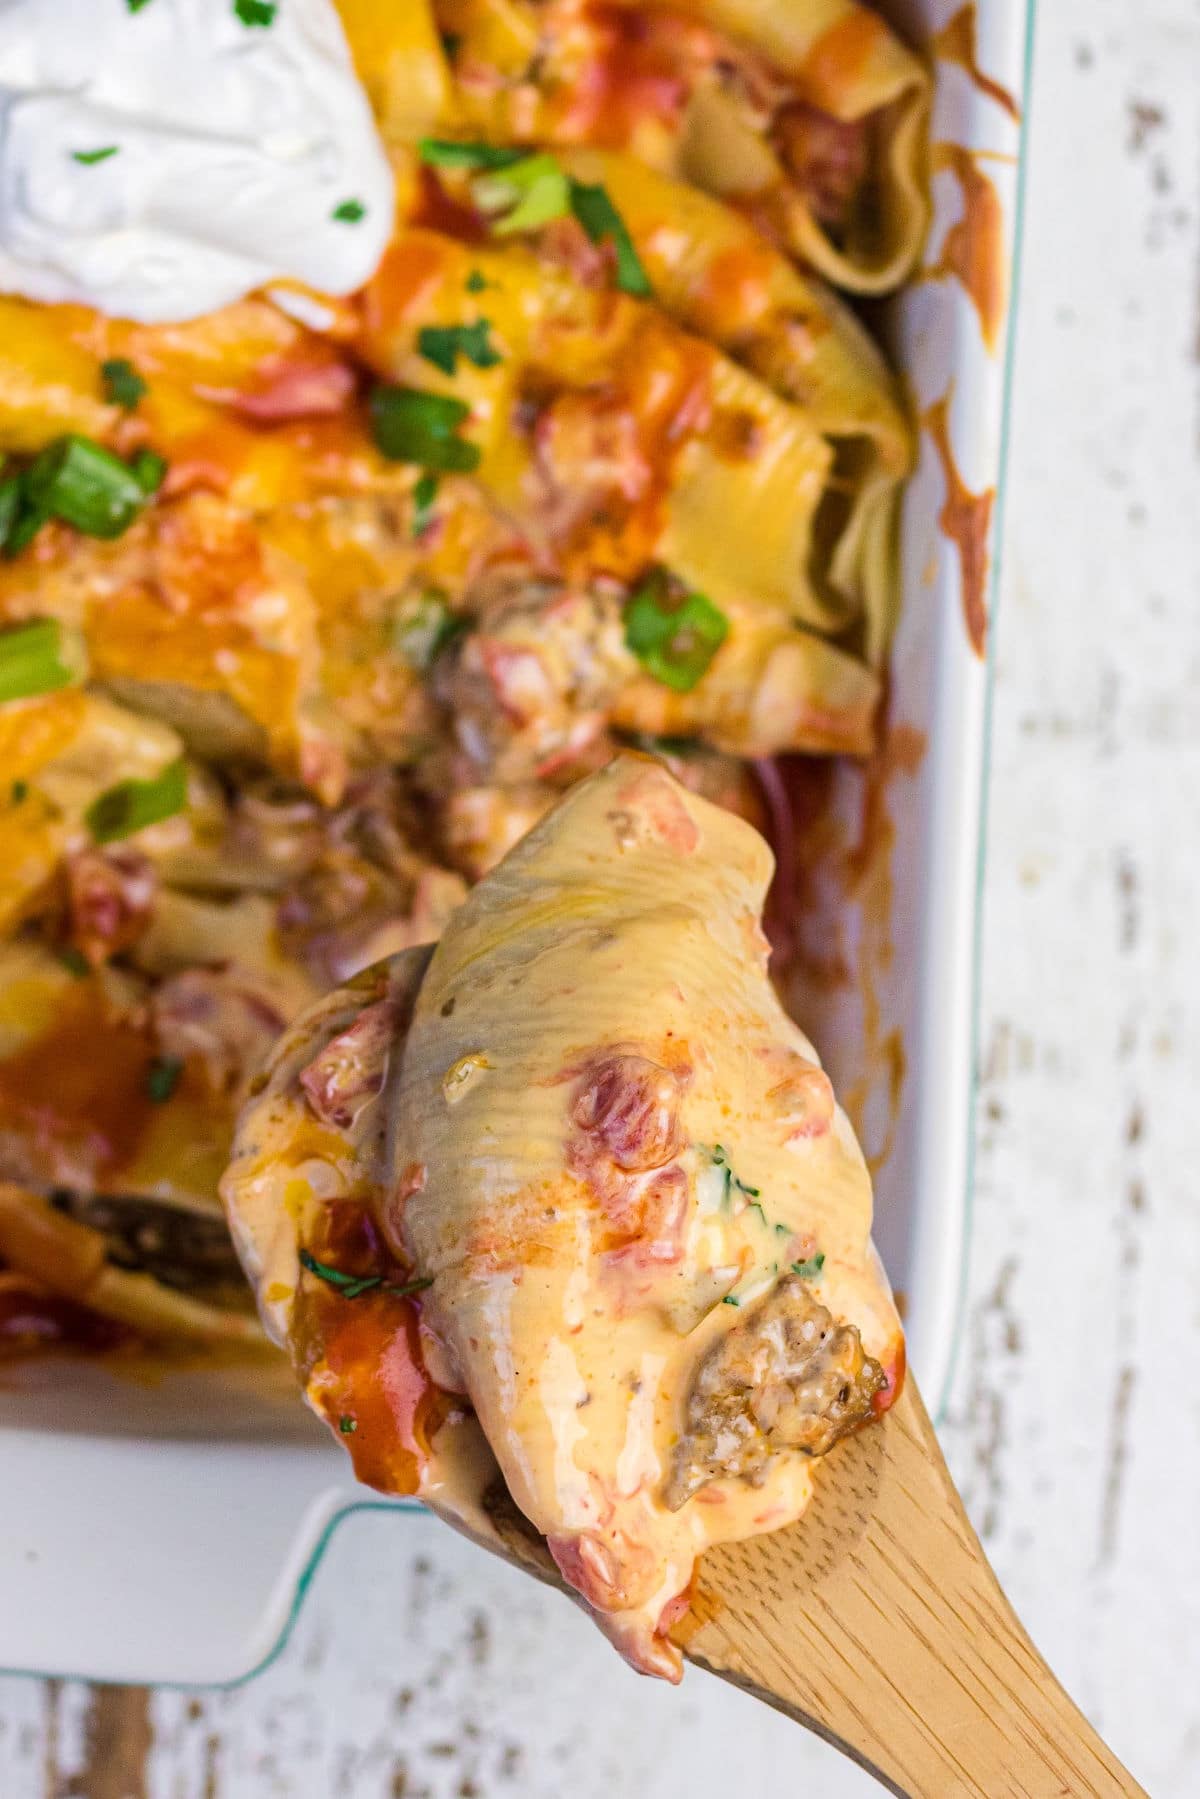 A serving of cheesy taco stuffed shells being lifted from the casserole dish.